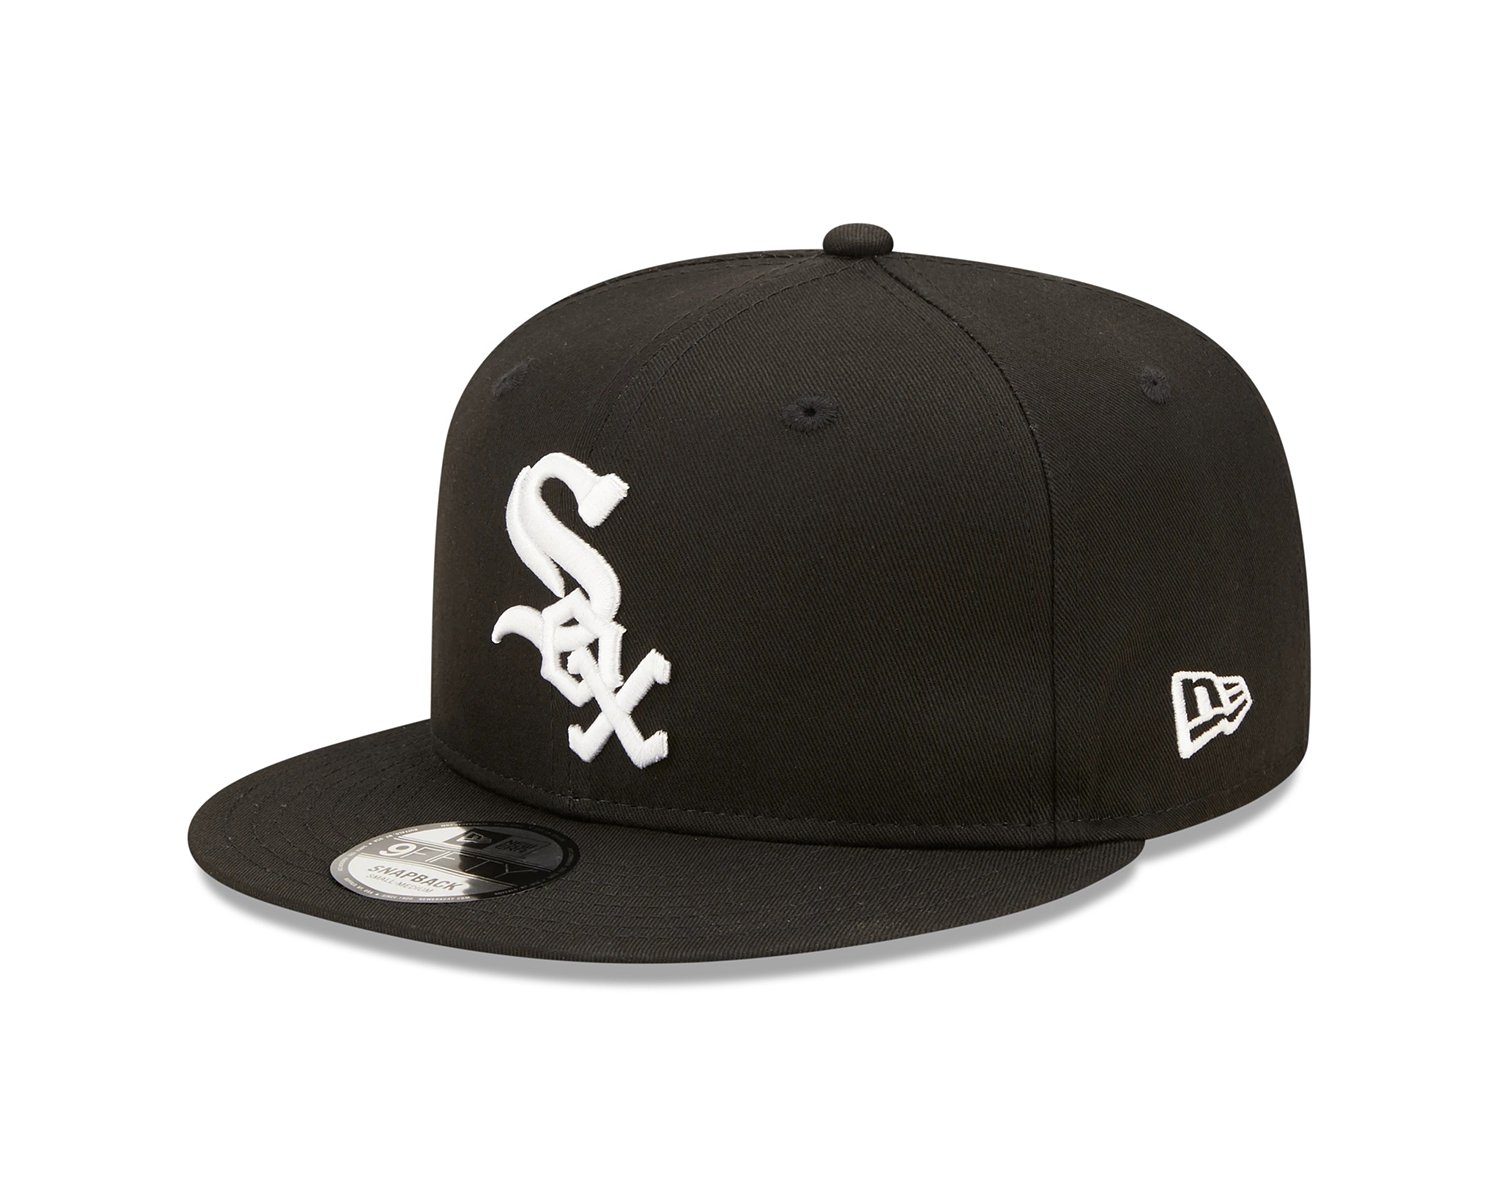 9FIFTY Cap Patch Side White New Team Era Sox Chicago Baseball